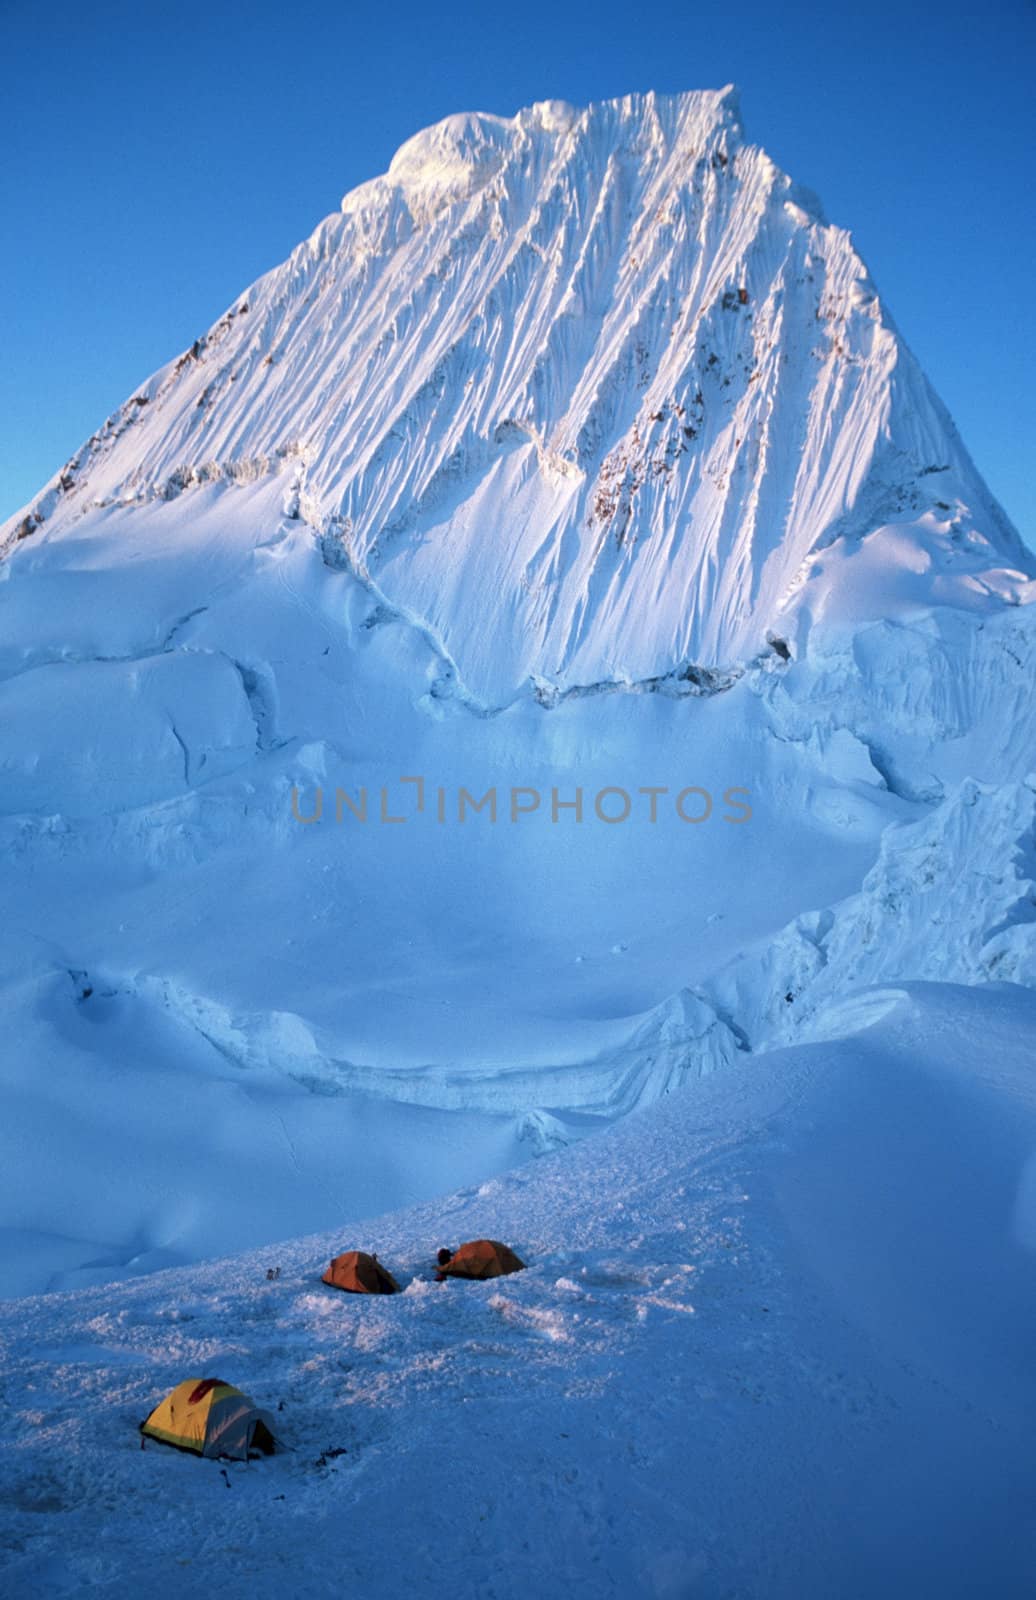 Alpayamo montain col camp, sunset, tents, Cordillera Blanca, Peru by RUSSELLIMAGES